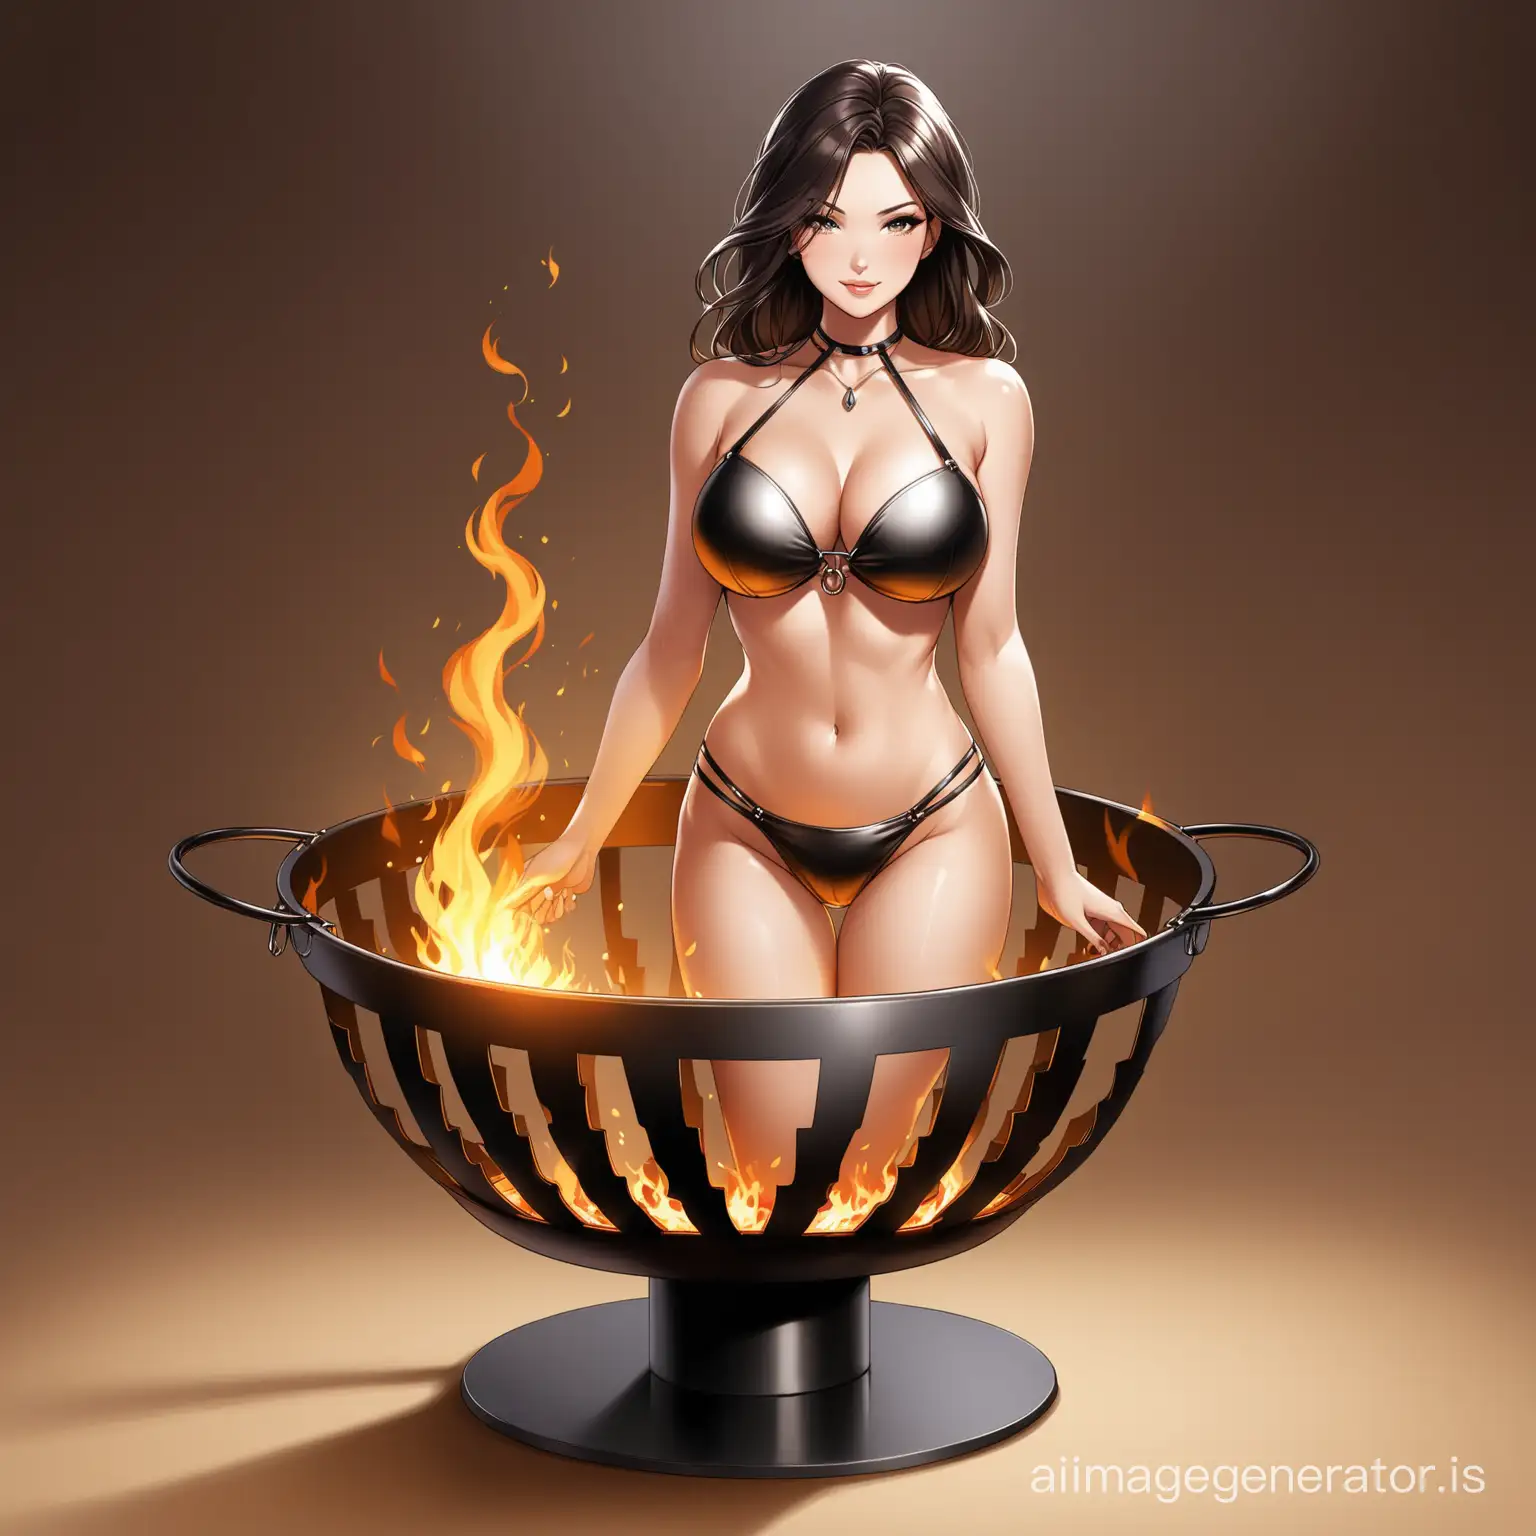 Latest ladies brazier design. Wearing a sexy lady